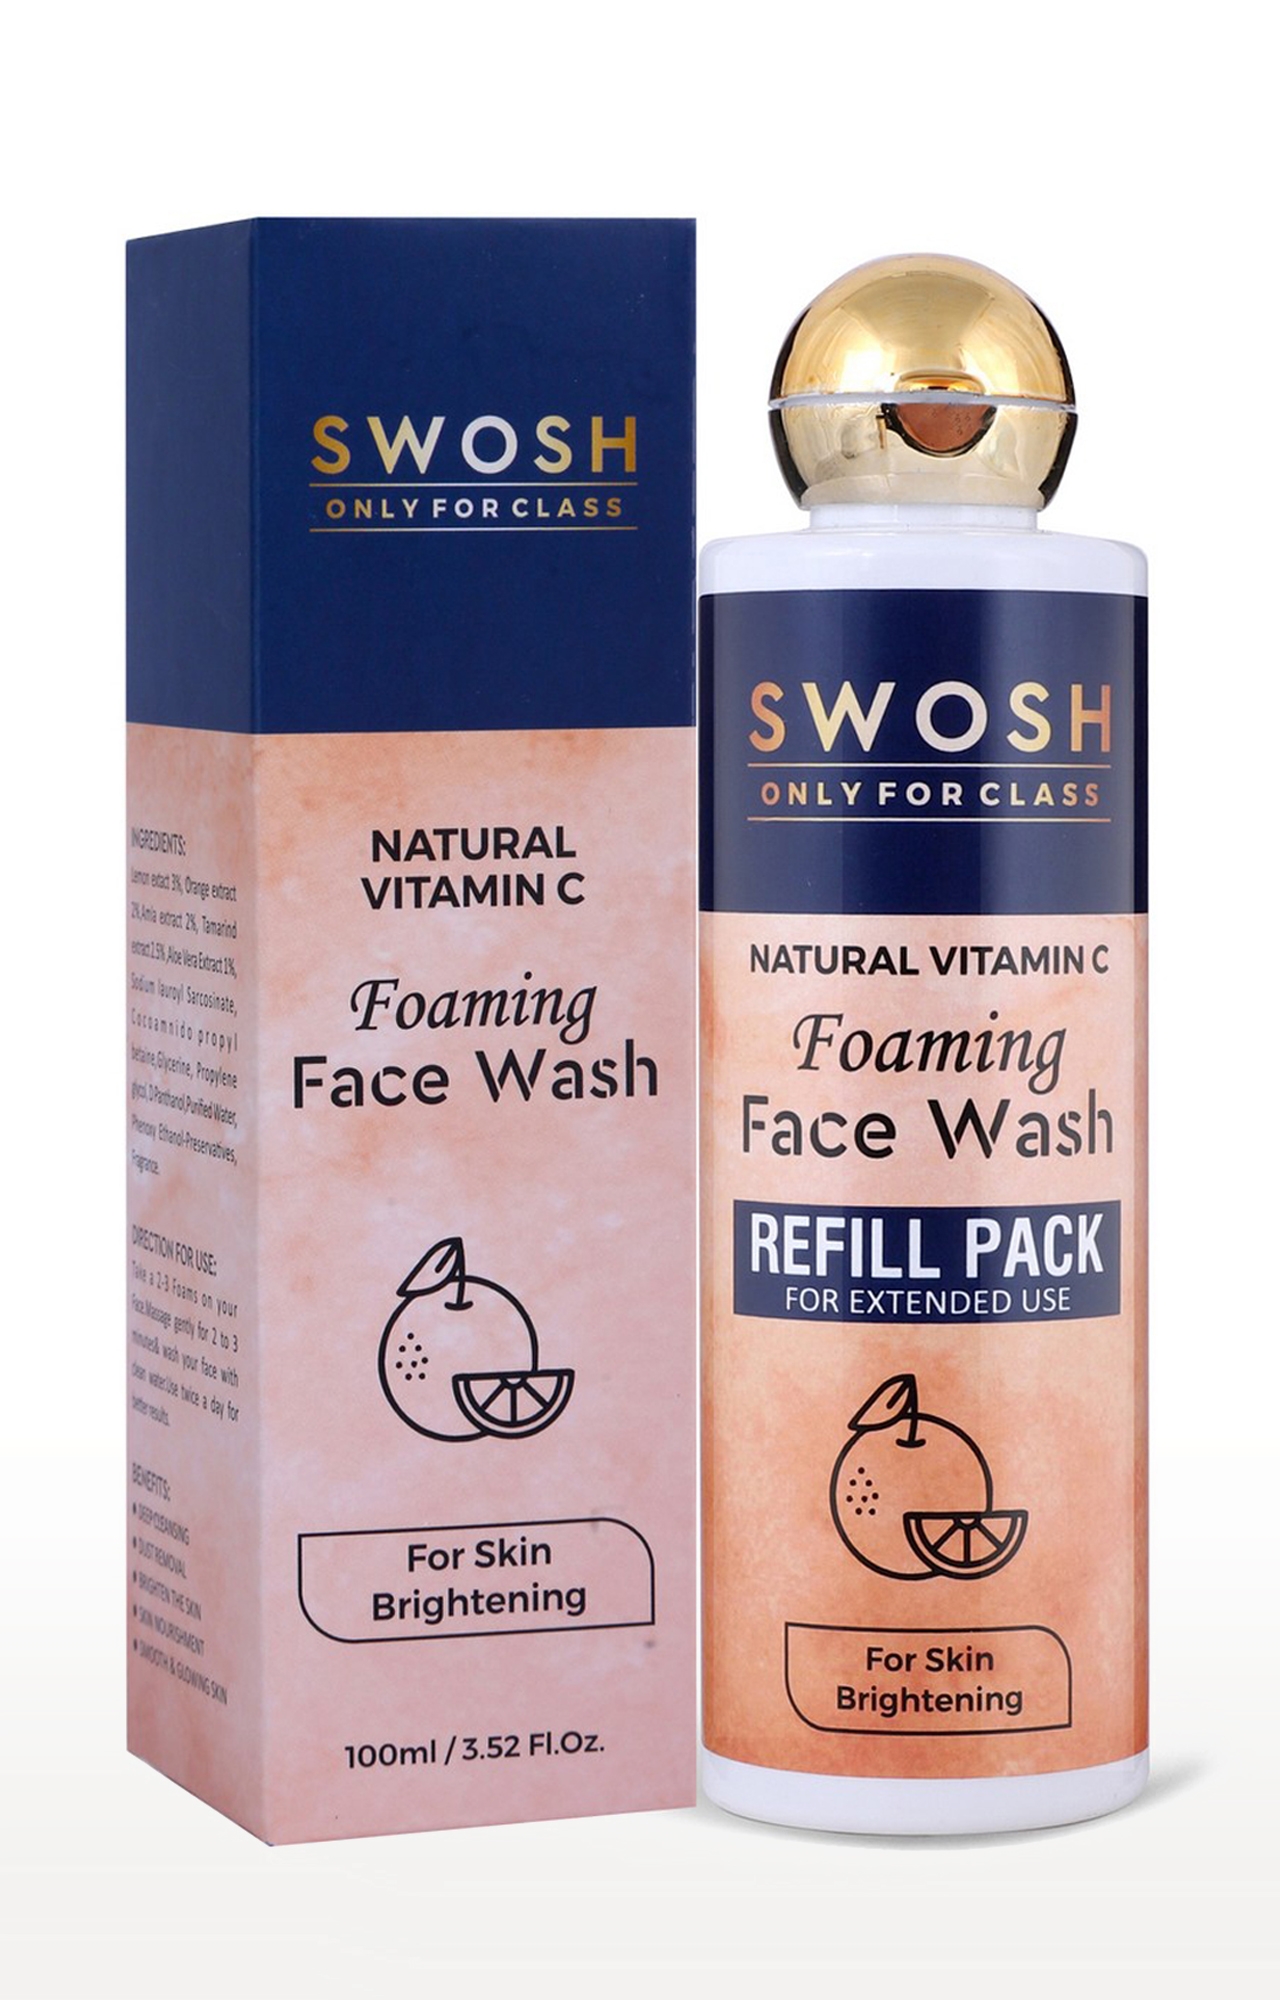 SWOSH | Swosh Natural Vitamin C Foaming Face Wash 2 In 1 Refill Pack For Pimple Prone & Oily Skin - No Parabens, Sulphate, Silicones & Colour, Pack Of 200 Ml 0